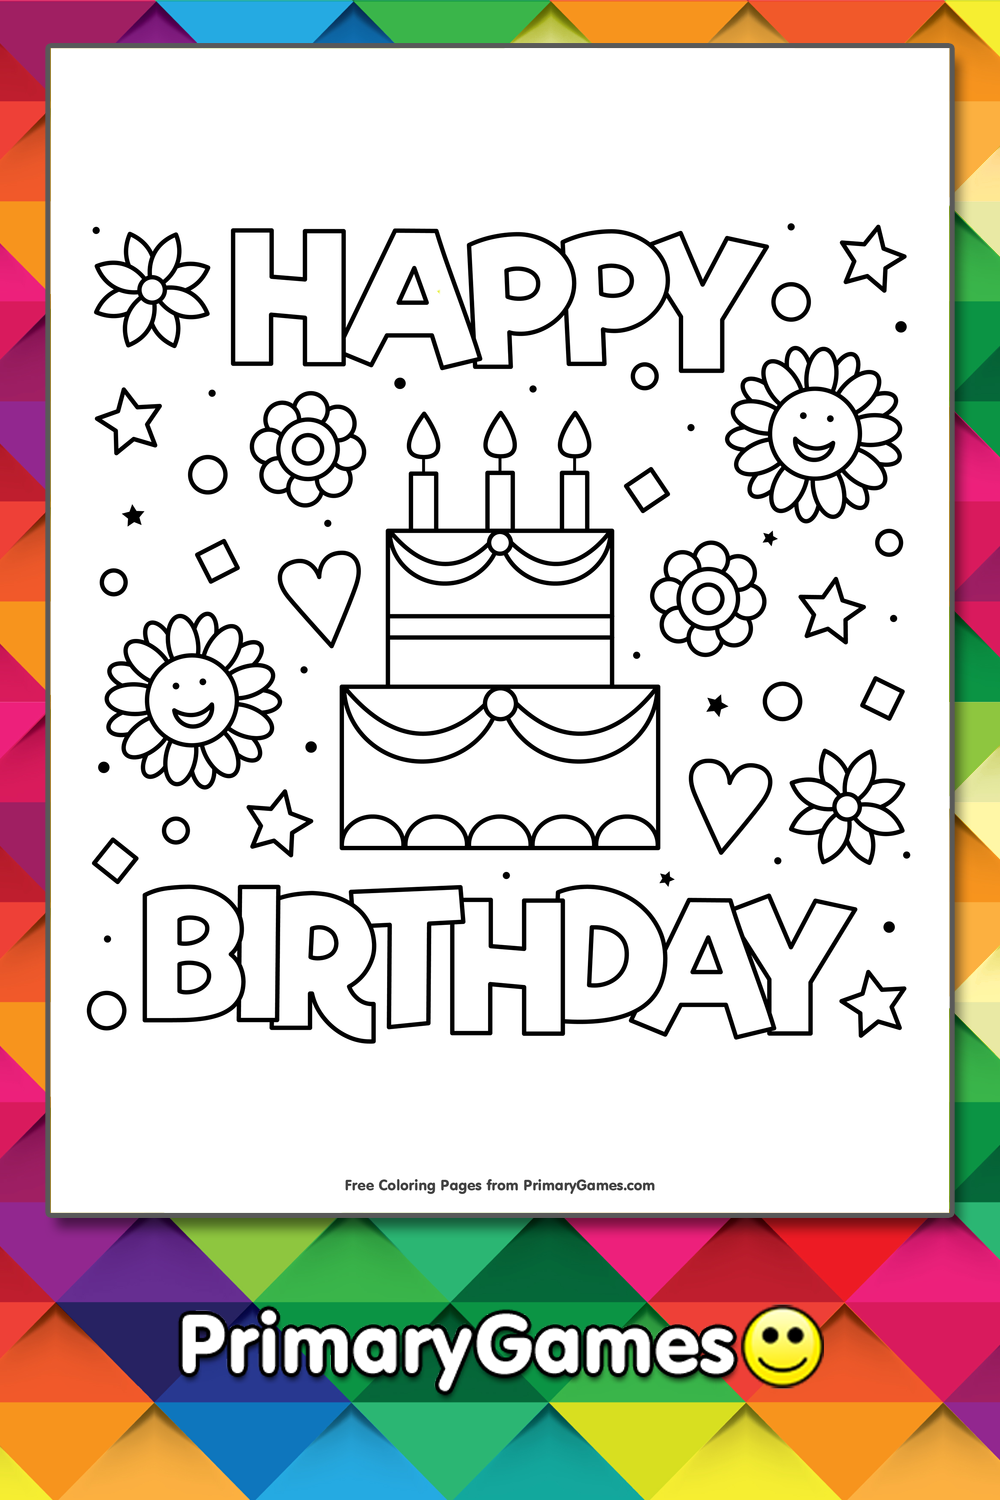 Download Happy Birthday Coloring Page Free Printable Pdf From Primarygames